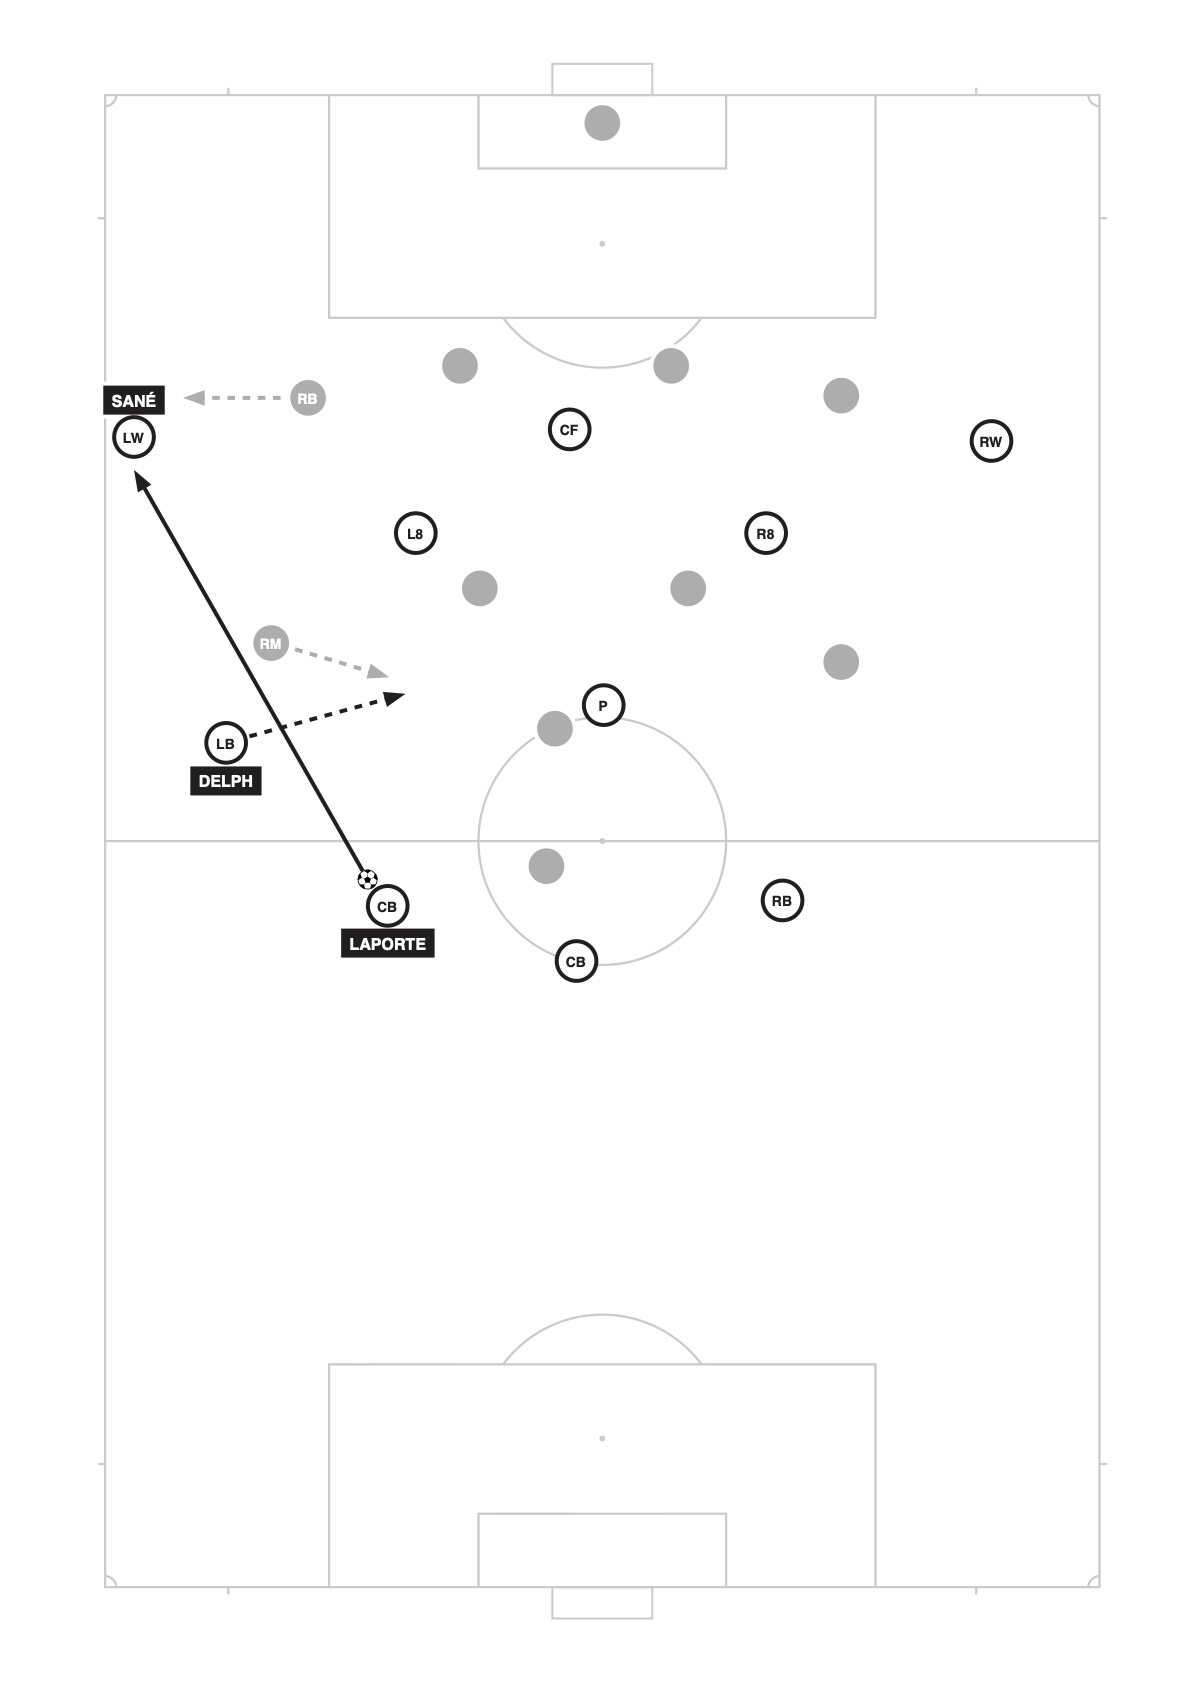 How the narrow positions of City’s LB opens up a 1 v 1 for their LW. Delph makes a run inside, taking the opposition wide player with him. This creates a passing line from Laporte to Sané, who finds himself 1 v 1 against the RB.